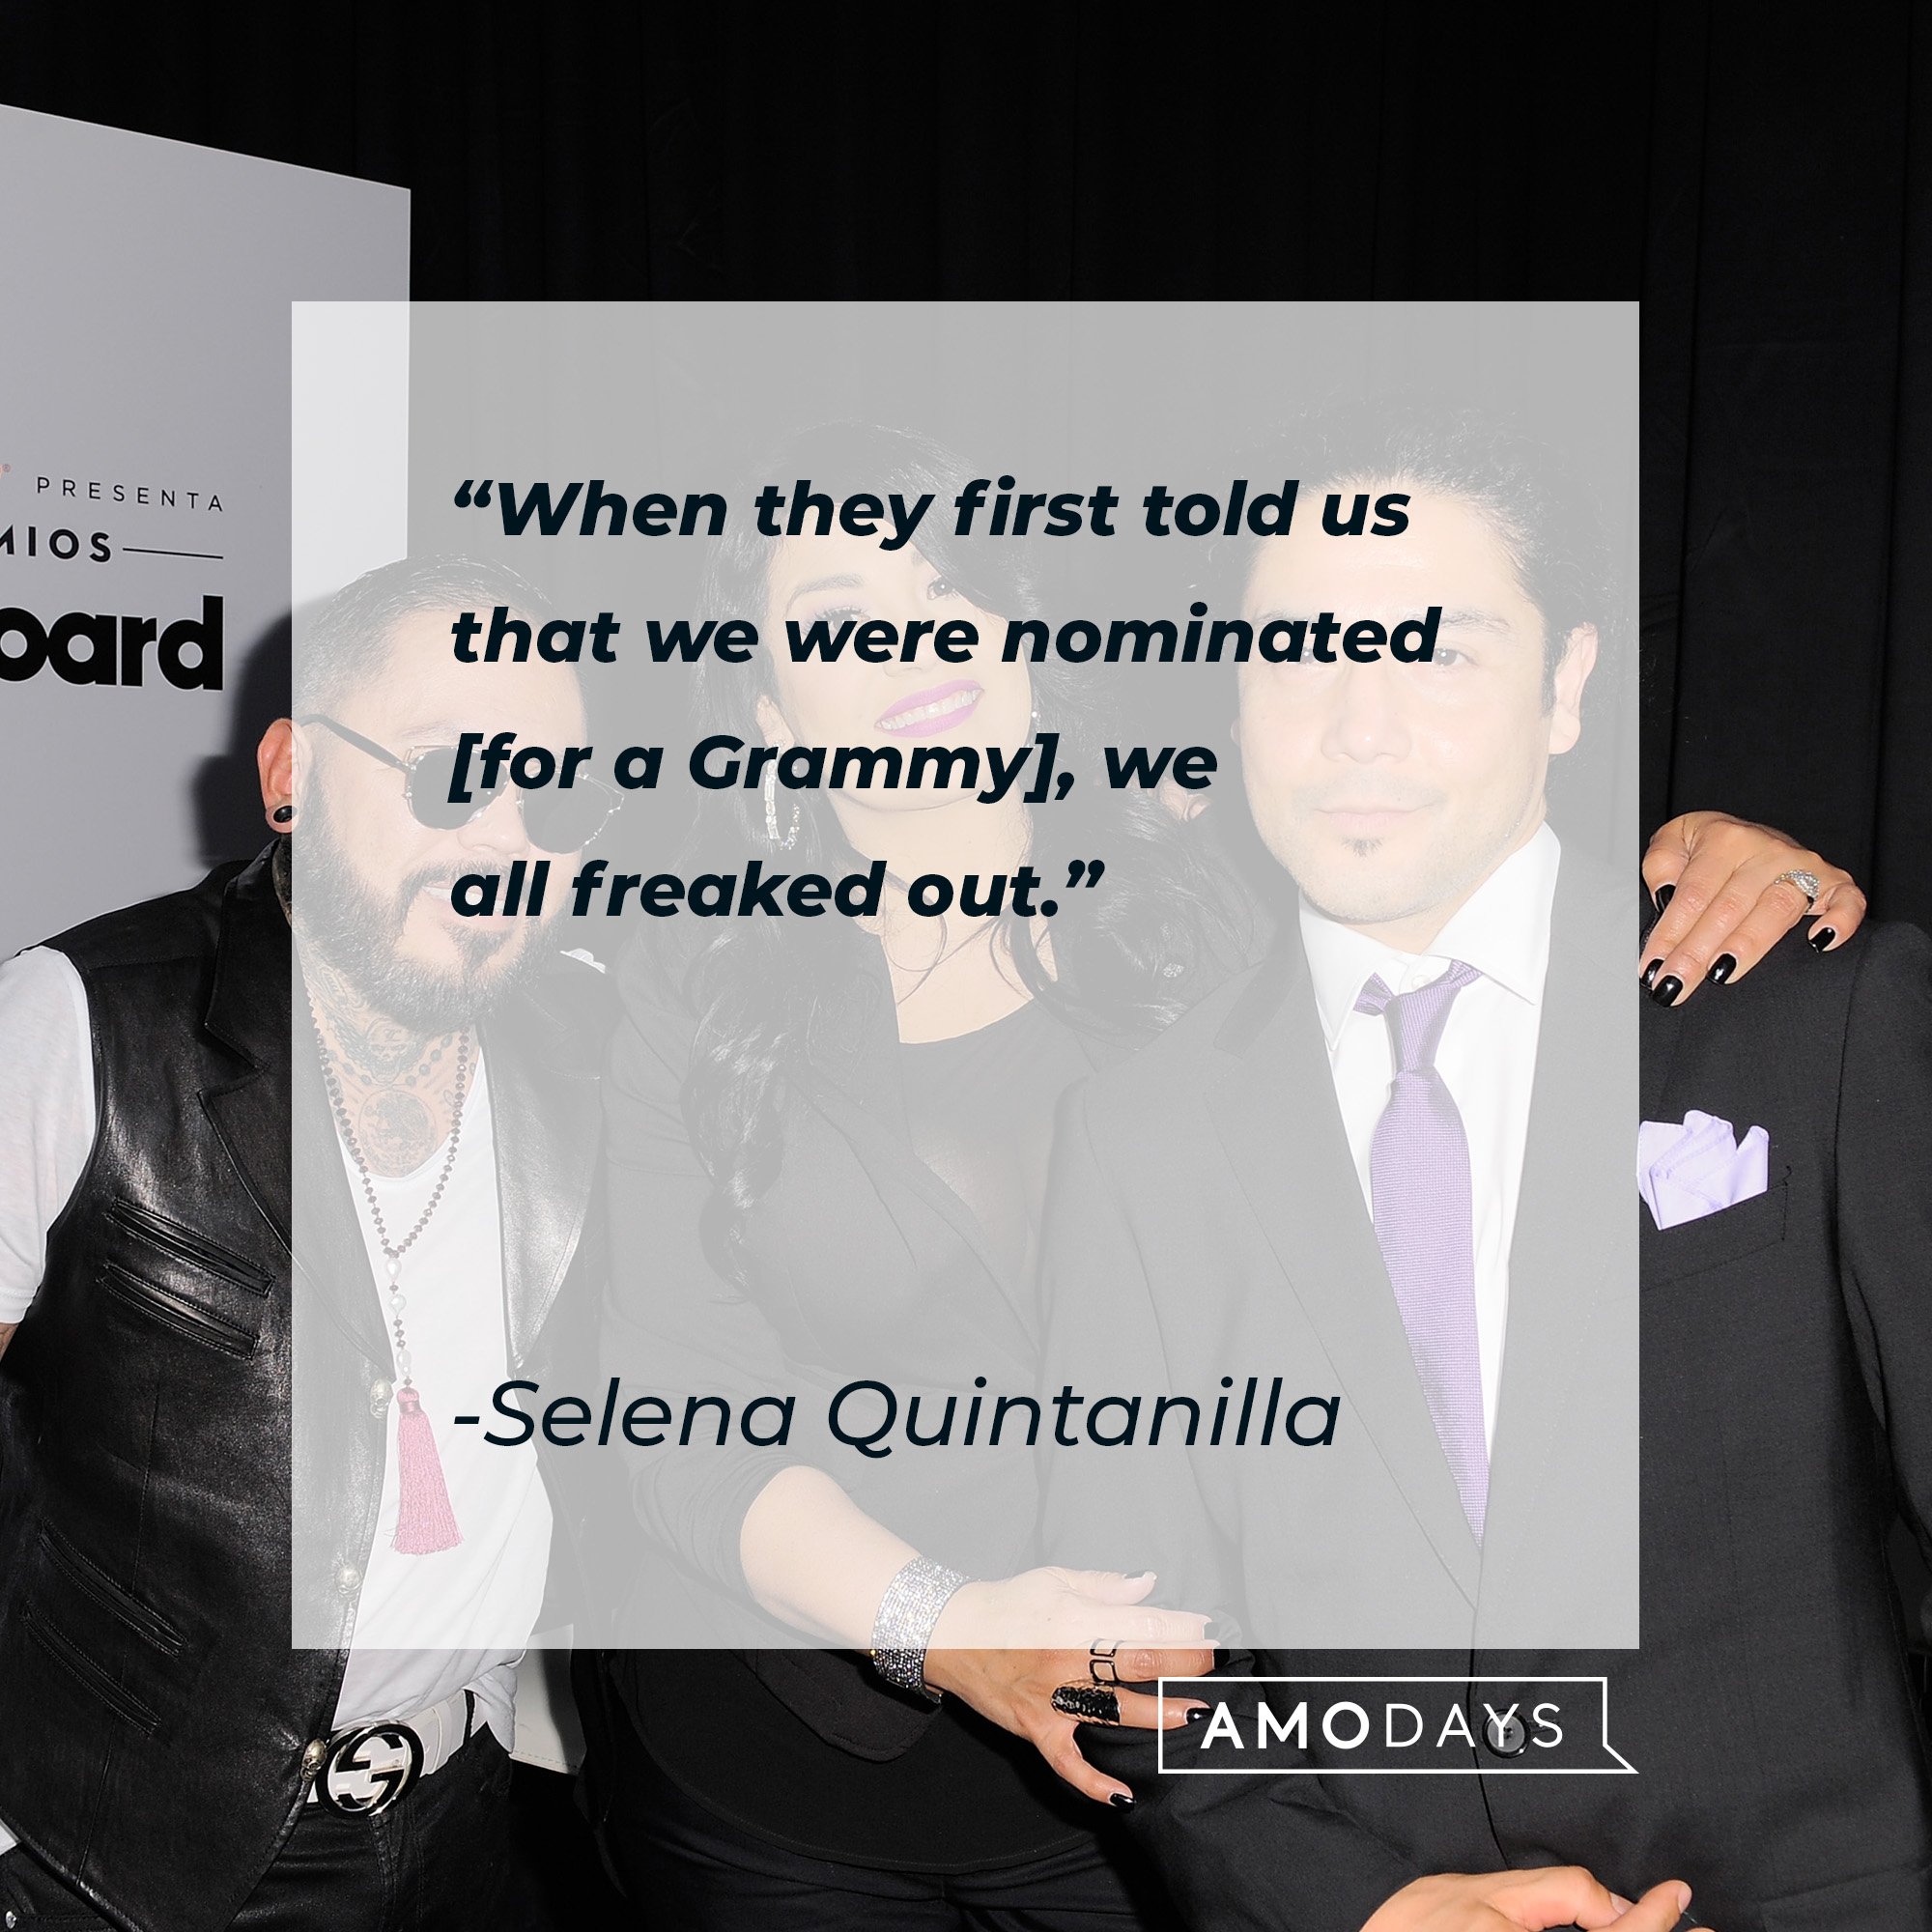 Selena Quintanilla's quote: "When they first told us that we were nominated [for a Grammy], we all freaked out." | Image: AmoDays